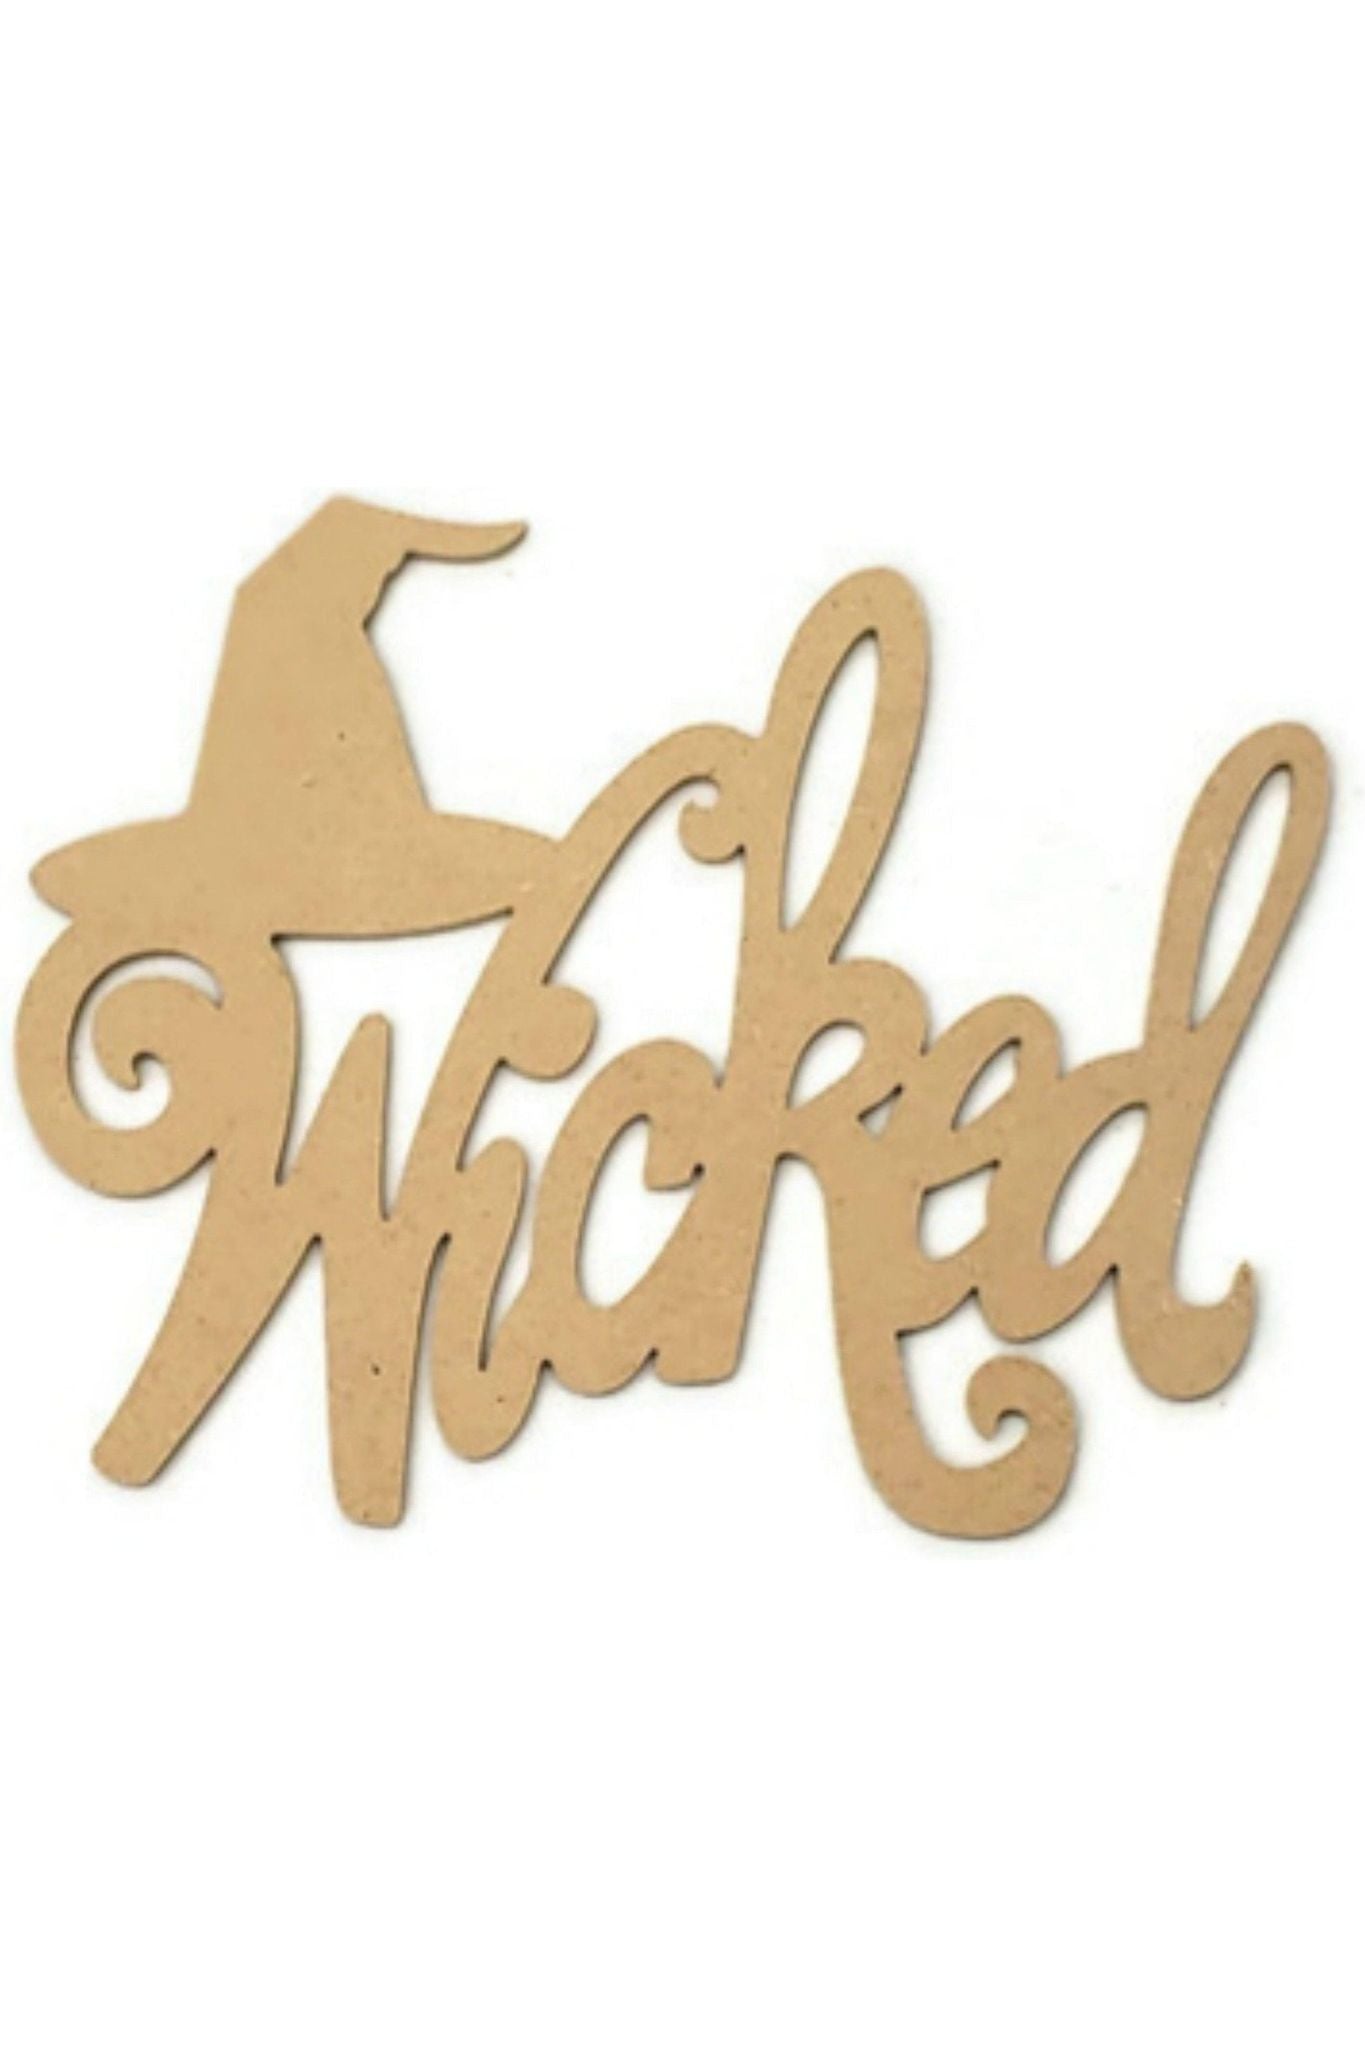 Shop For Wicked Script Wood Cutout with Witch Hat - Unfinished Wood